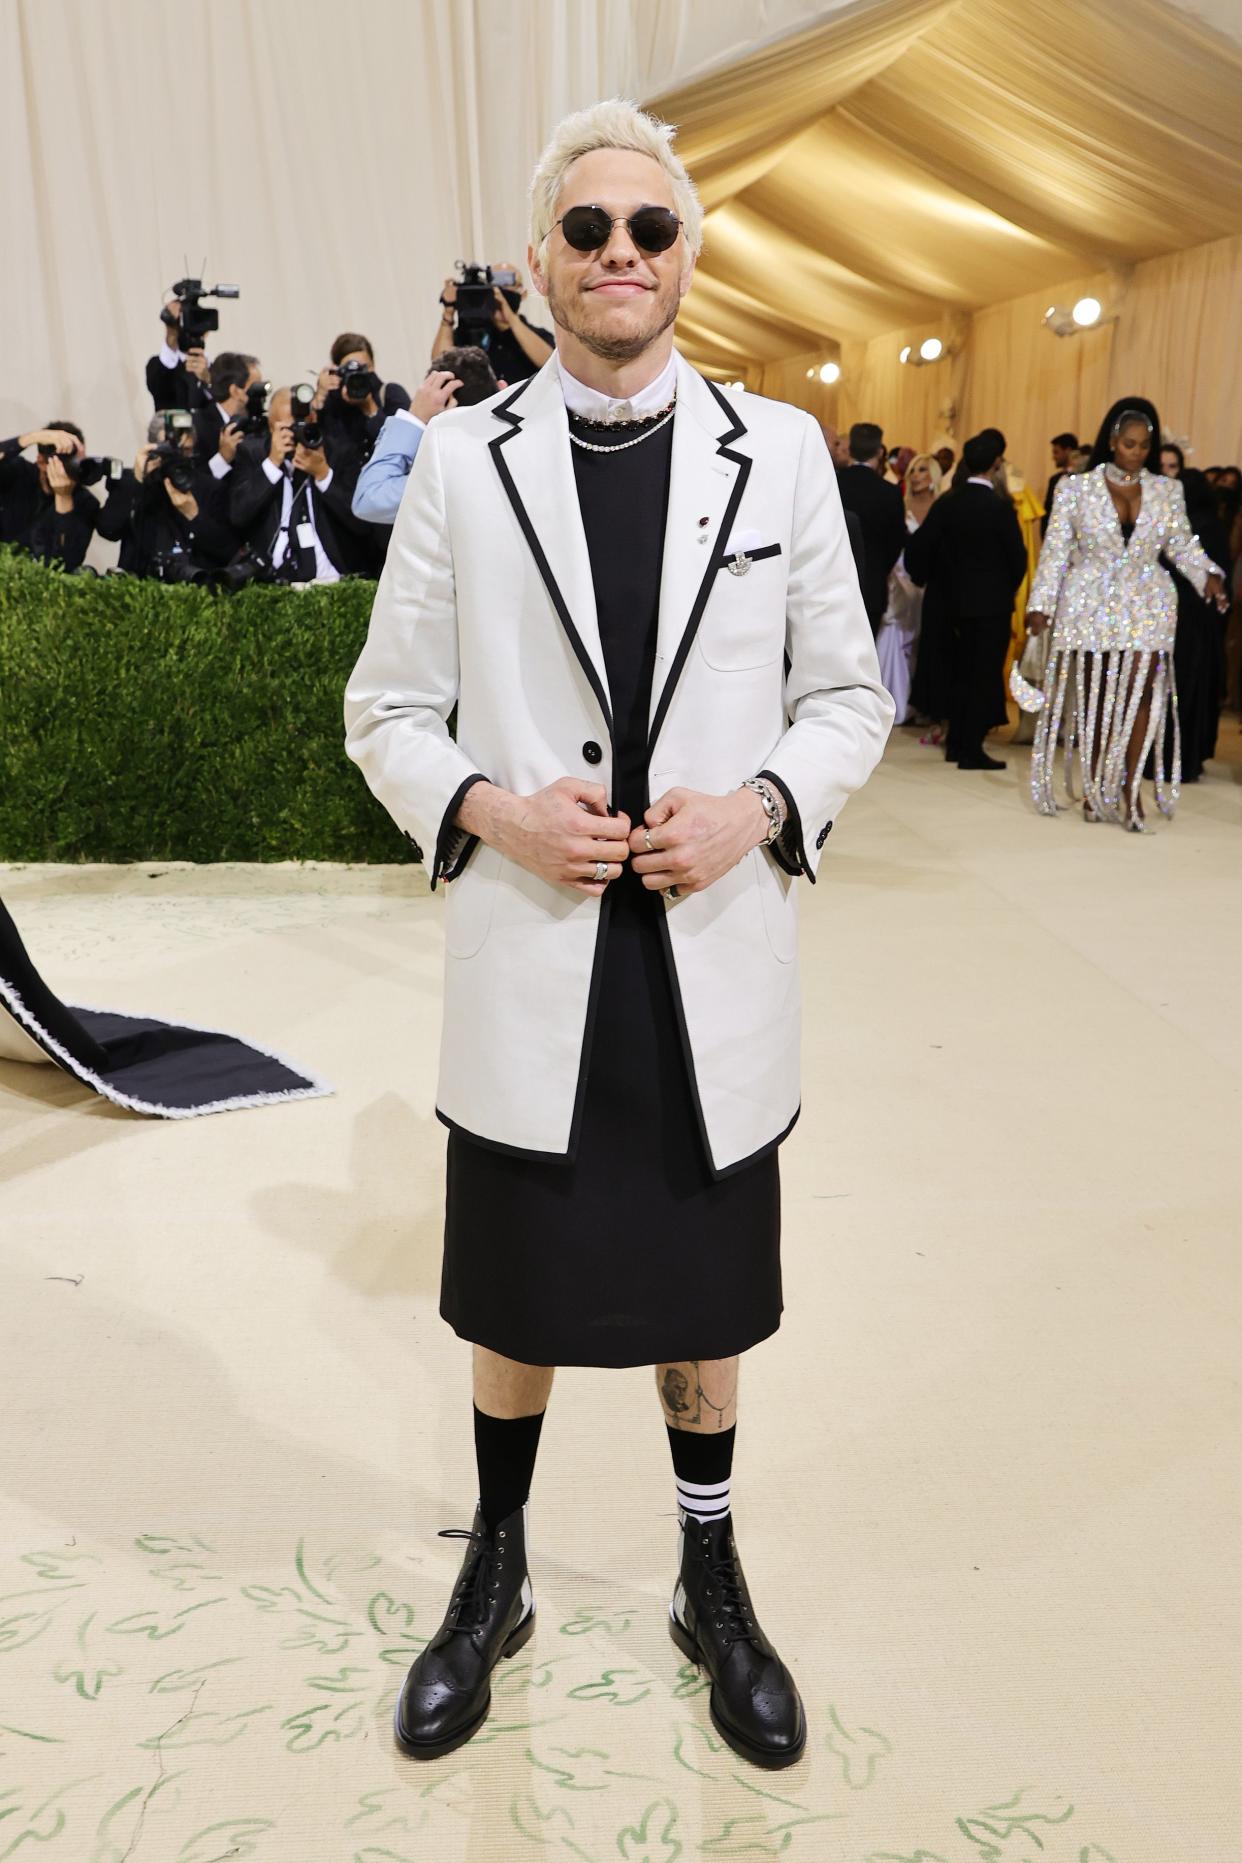 Pete Davidson attends The 2021 Met Gala Celebrating In America: A Lexicon Of Fashion at Metropolitan Museum of Art on Sept. 13, 2021 in New York.